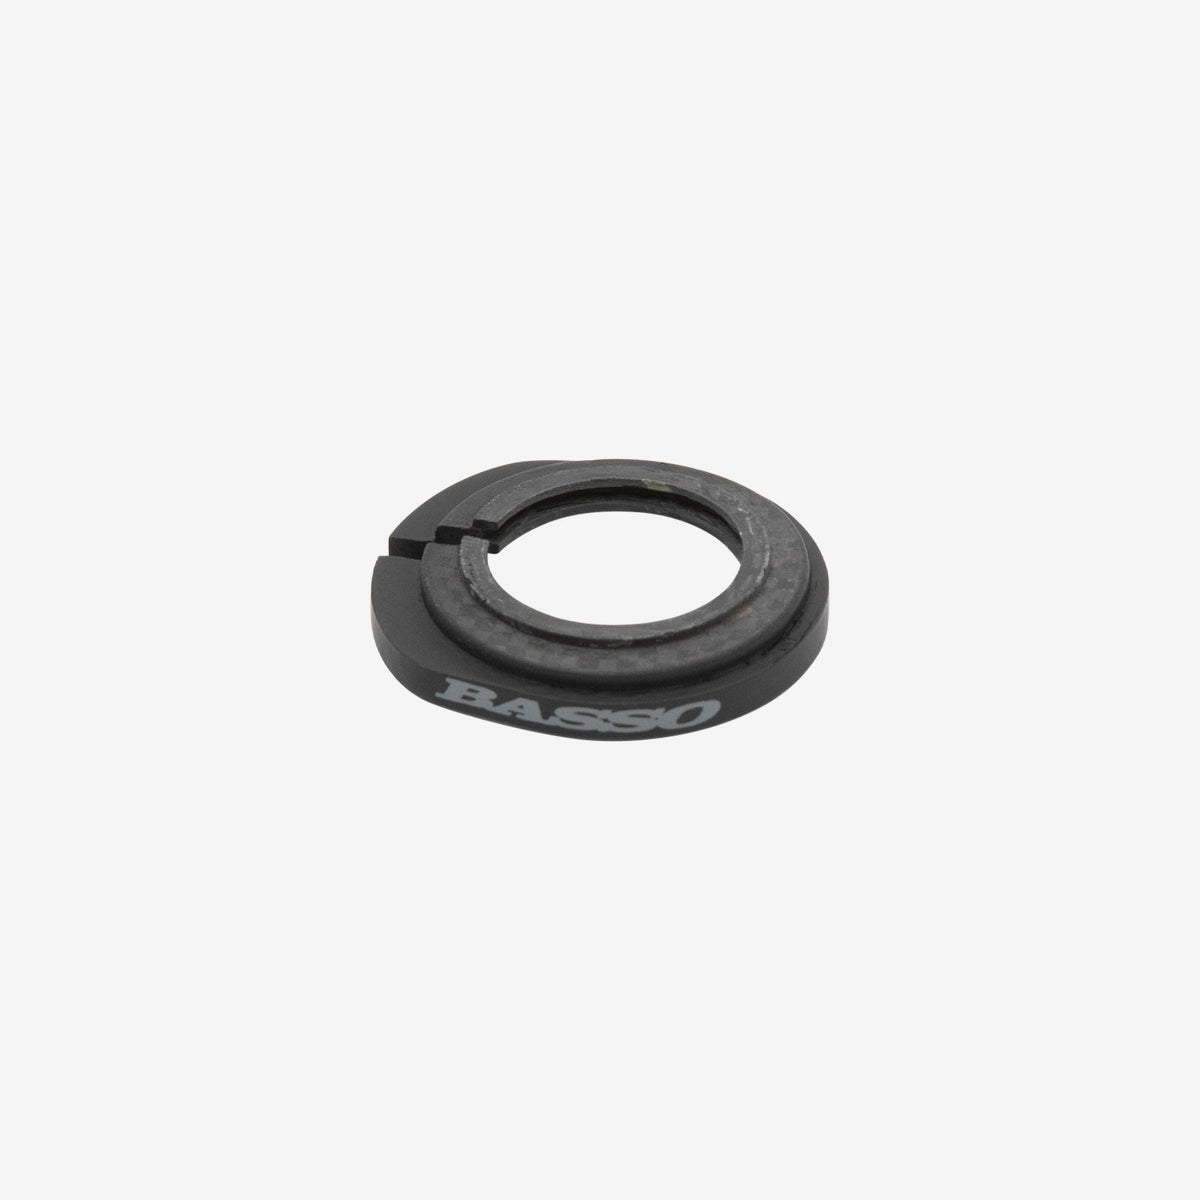 Basso carbon spacer 5mm